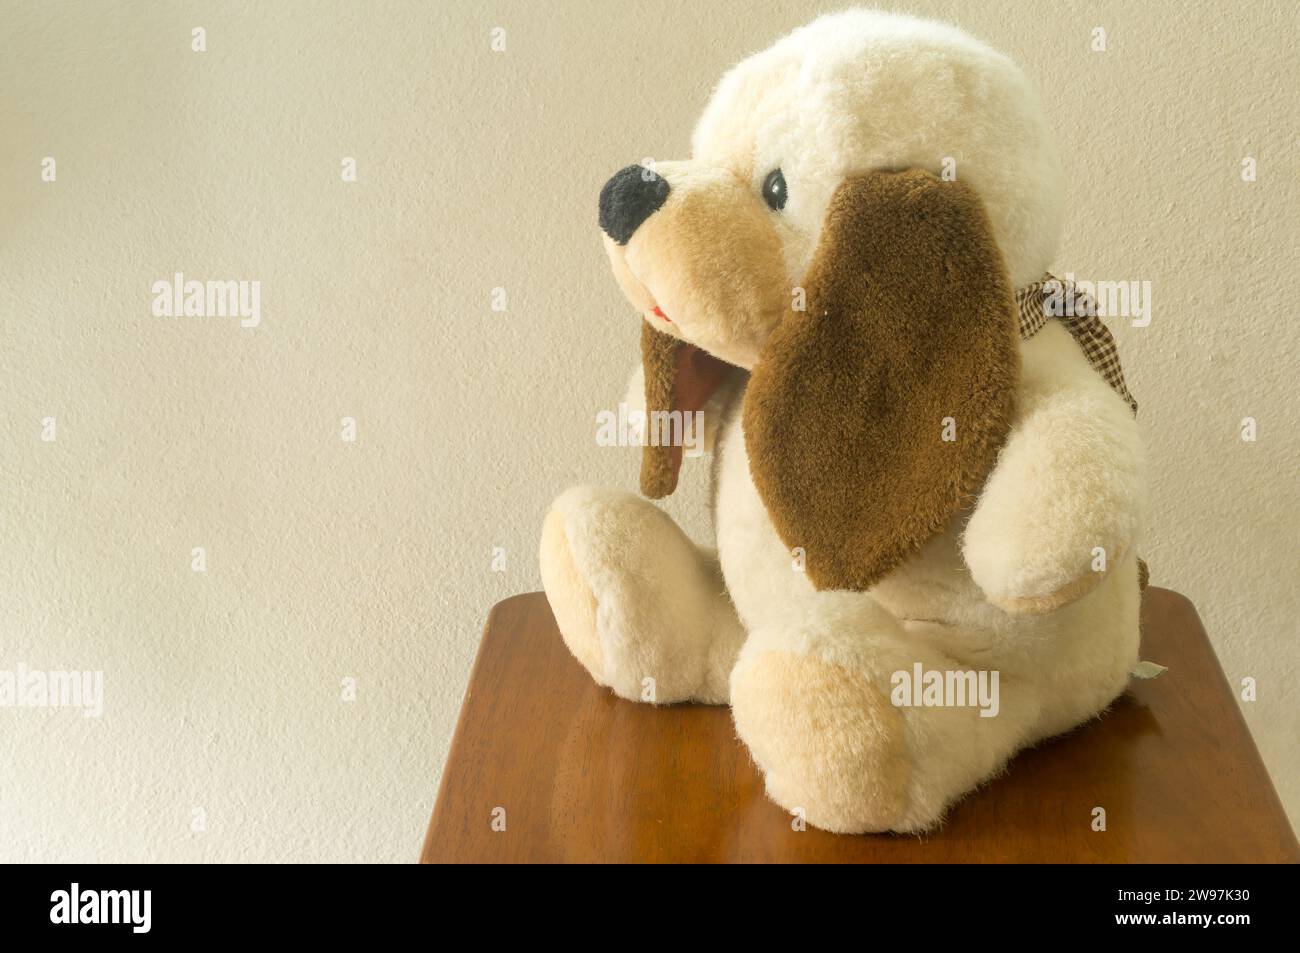 Adorable little dog doll is sitting on chair with side against the room wall with copy space for text. Cute plush pup doll for children or kids' play Stock Photo